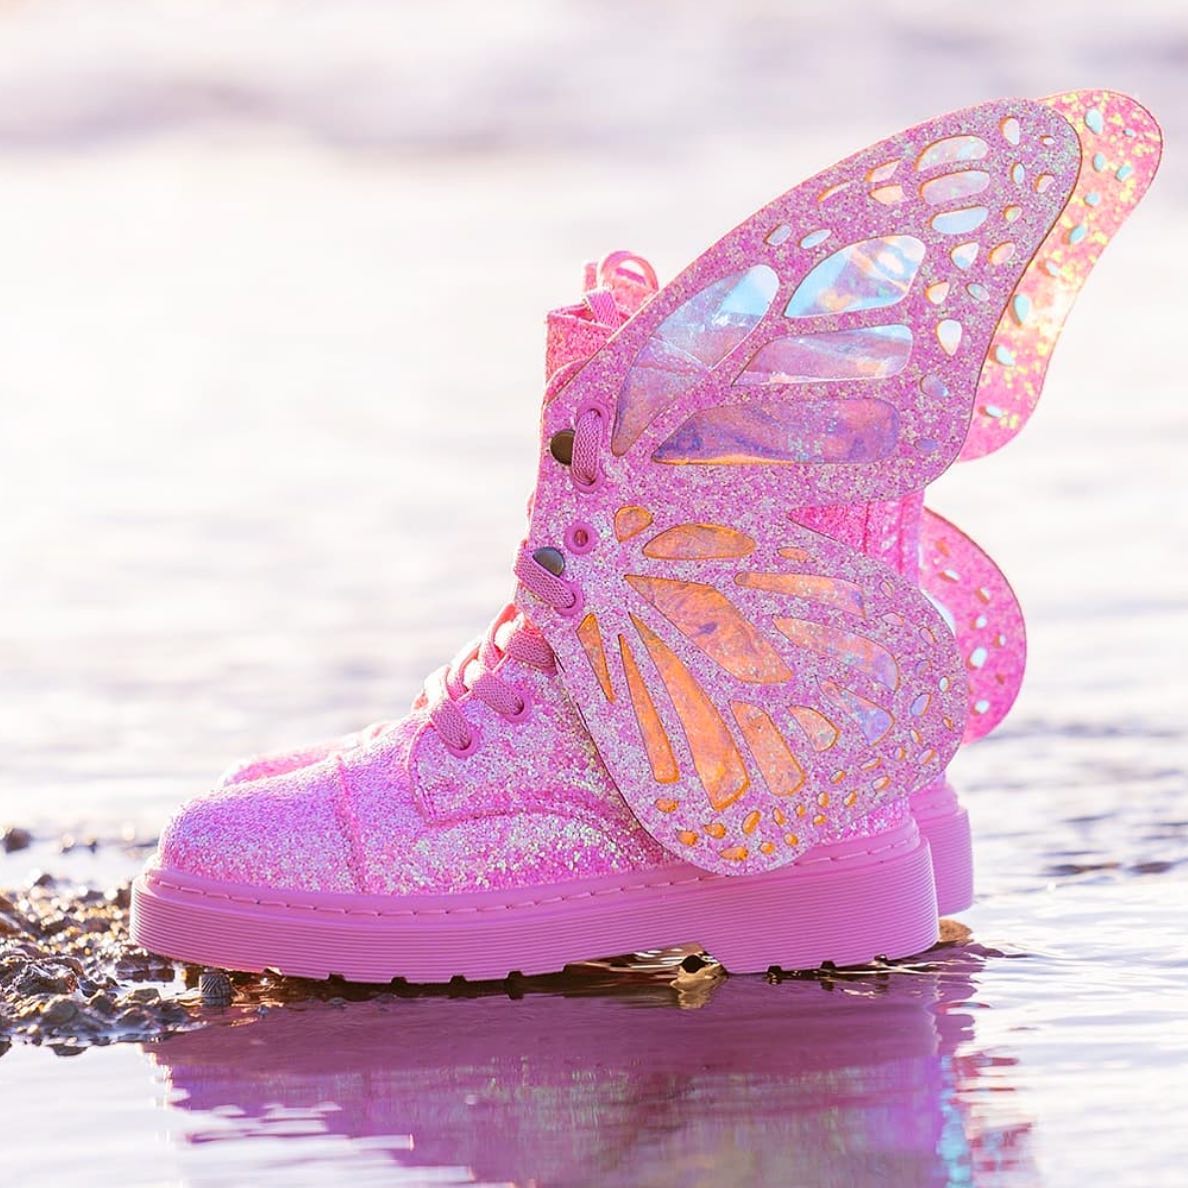 GLITTER BUTTERFLY SHOES - PINK